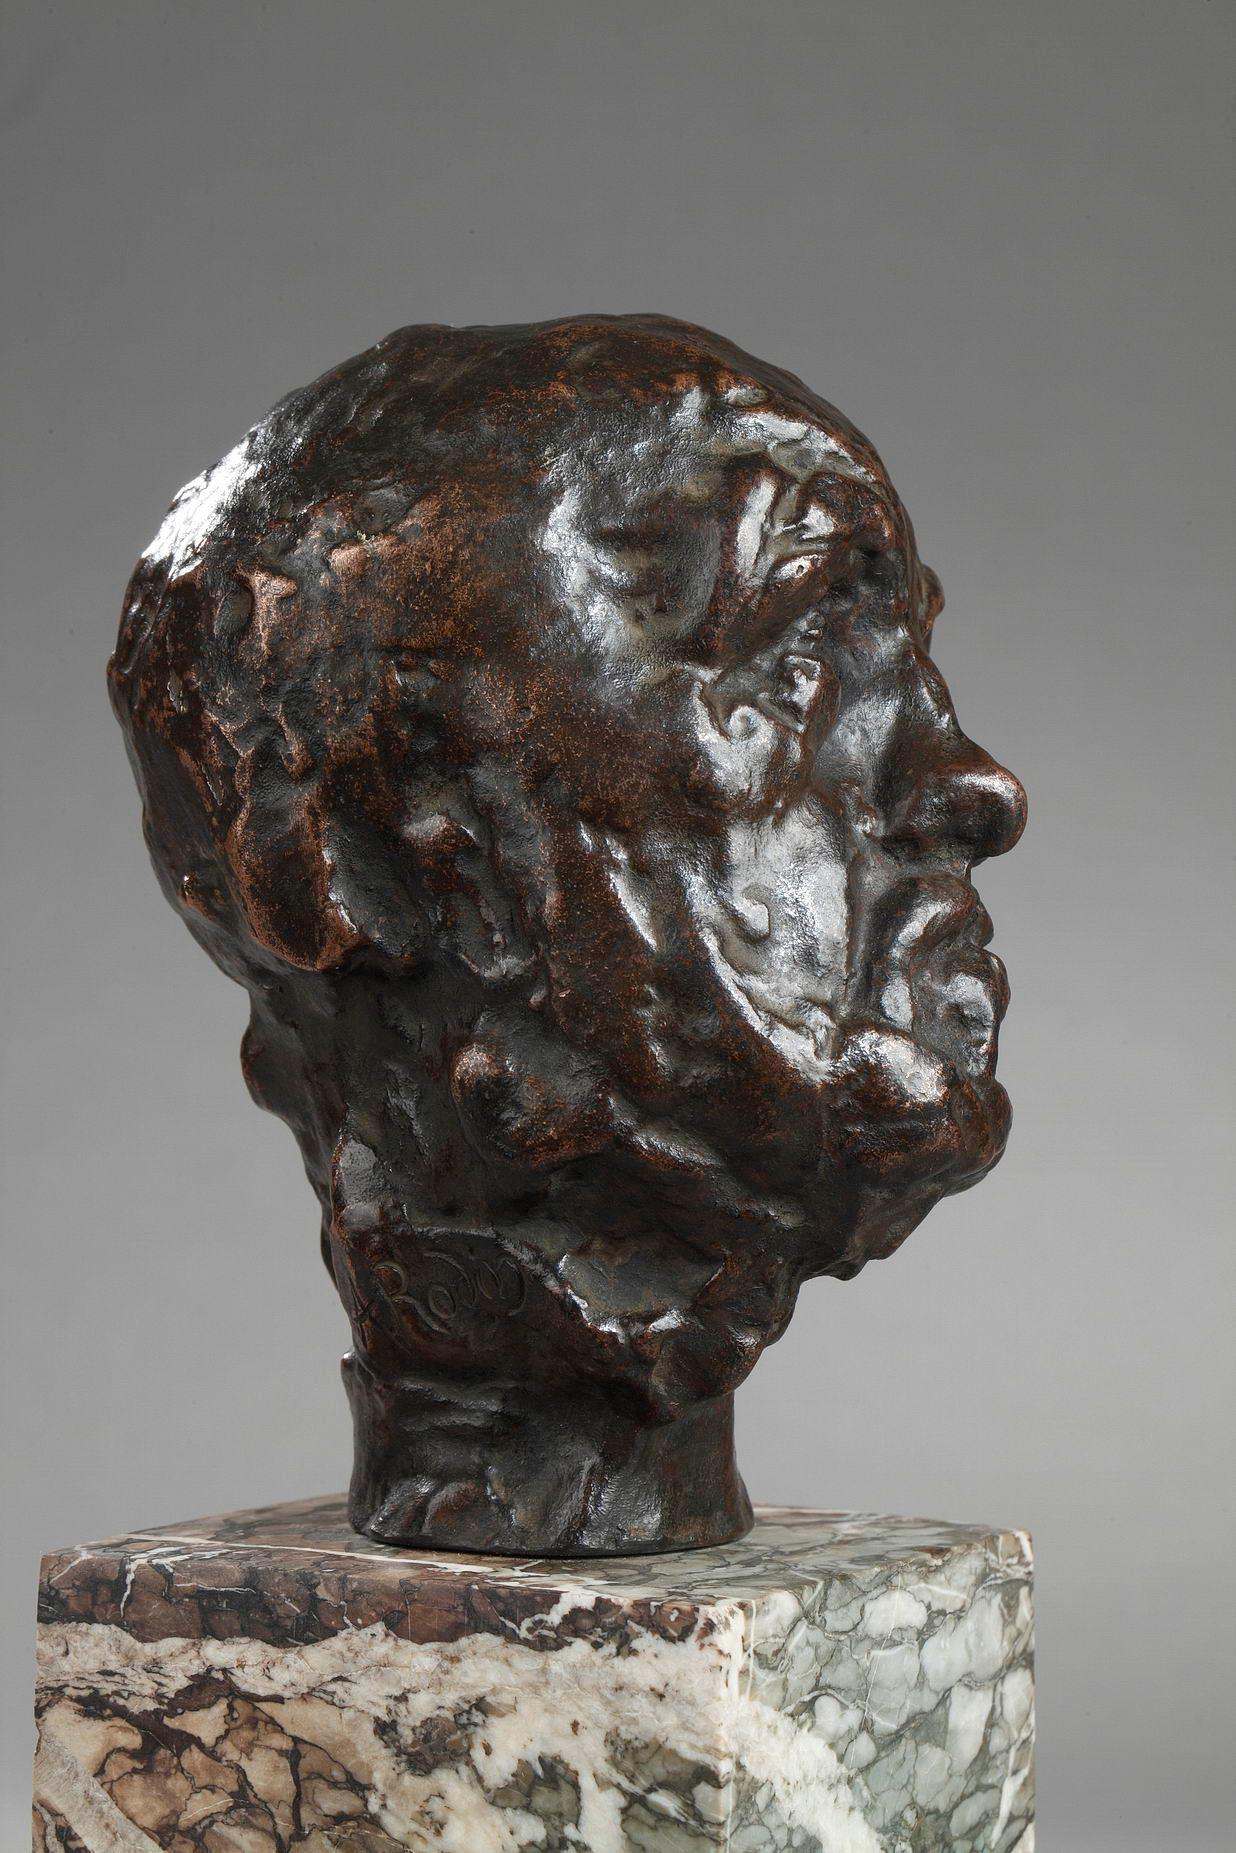 Petite tête de l'Homme au nez cassé
Small head of the Man with the broken nose
by Auguste RODIN (1840-1917)
Sketch for the Gates of Hell
Variant with symmetric neck

Bronze with black-dark brown patina
Signed 